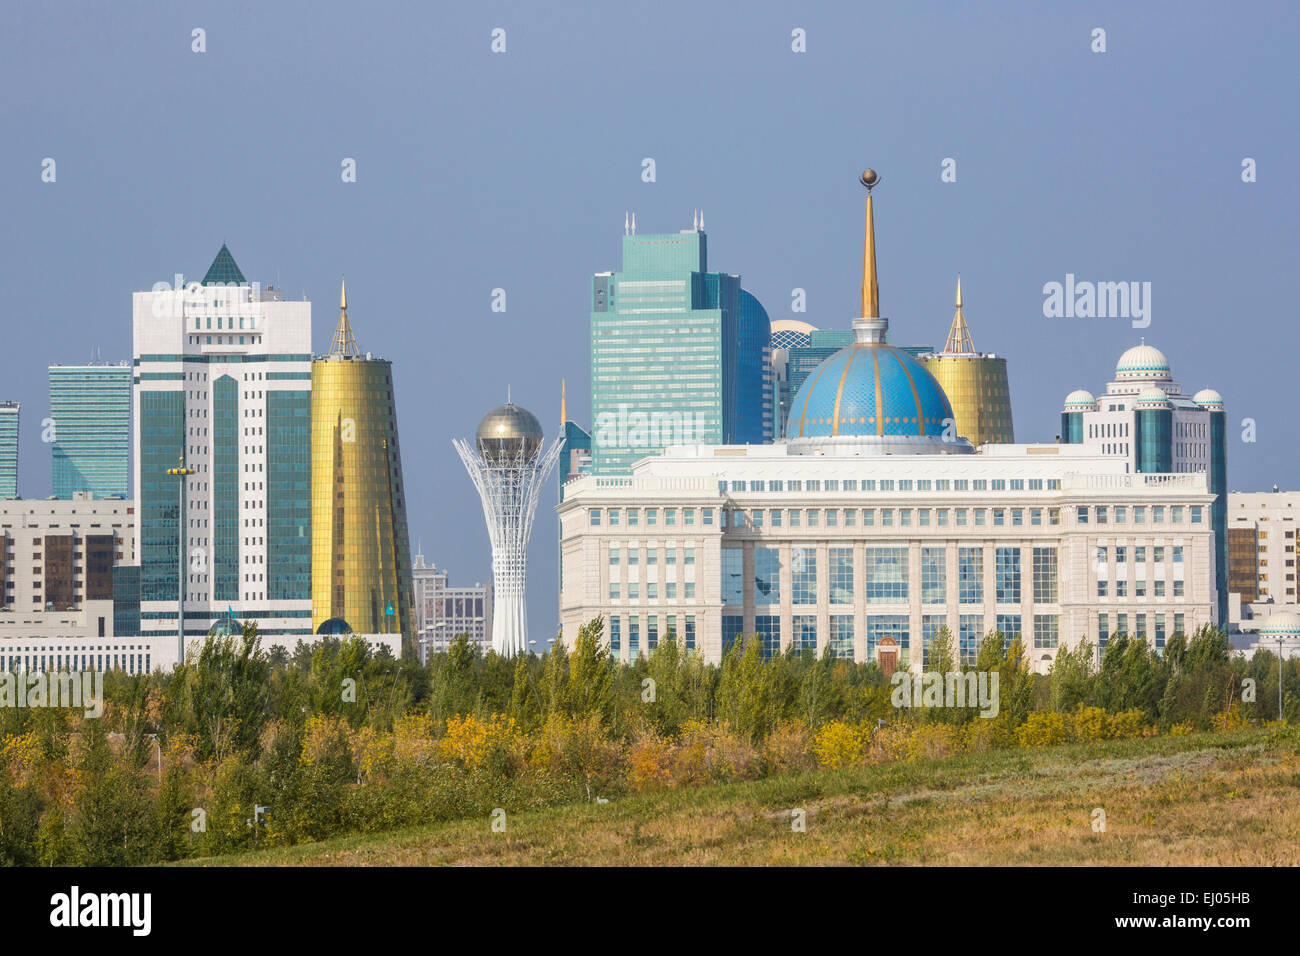 Administrative City, Astana, City, Kazakhstan, Central Asia, New, Palace, Summer, architecture, colourful, no people, panorama, p Stock Photo